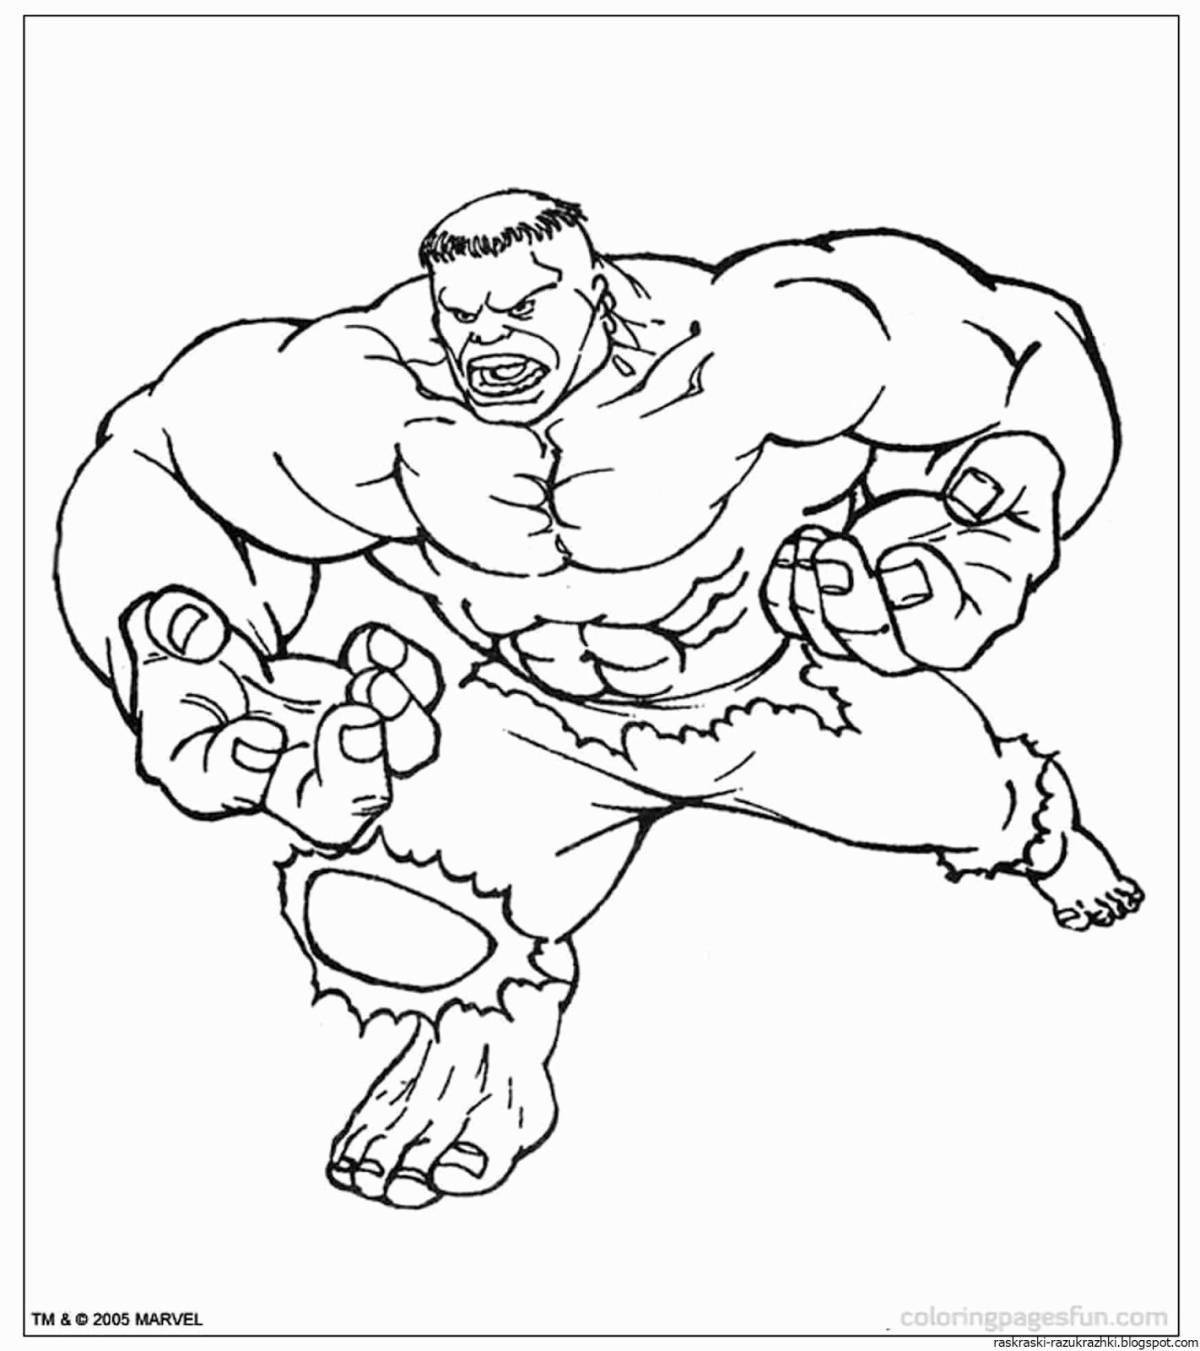 Colorful hulk coloring book for kids